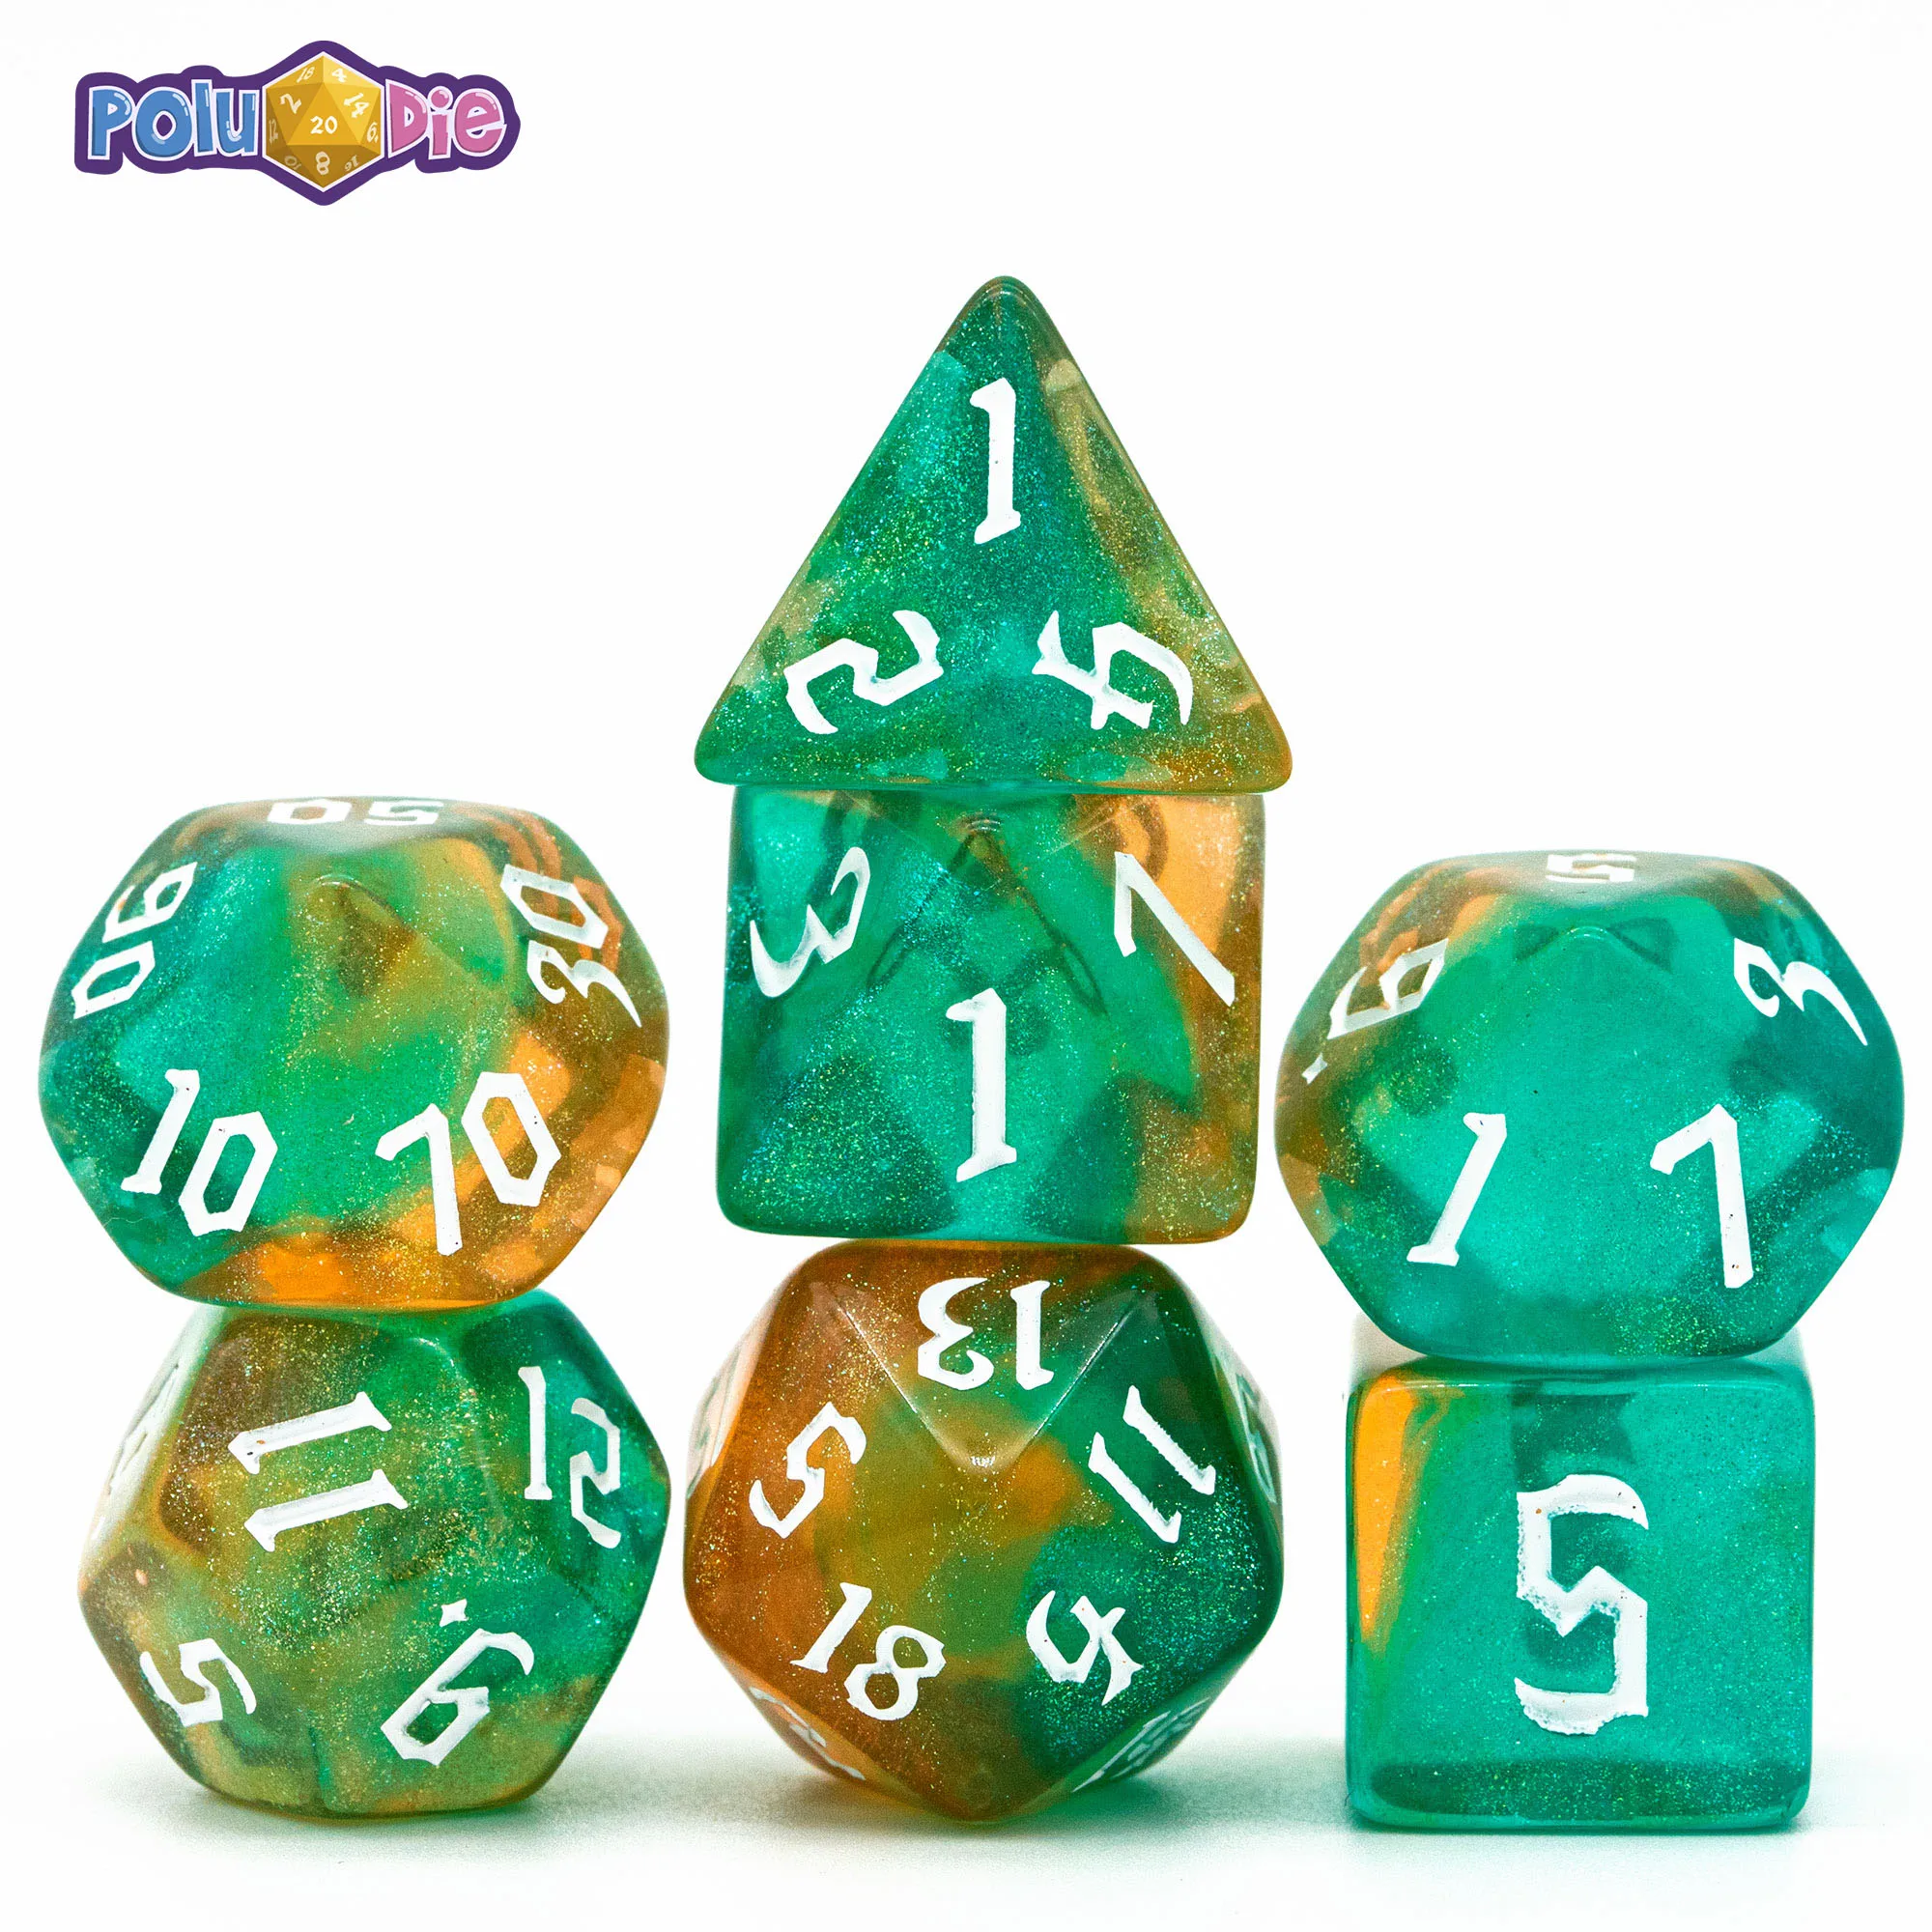 

7Pcs/Set Brown Blue DND Dice Set D4 D6 D8 D10 D% D12 D20 Sickle Font Polyhedral Dice for Role Playing Board Game D&D RPG MTG DND